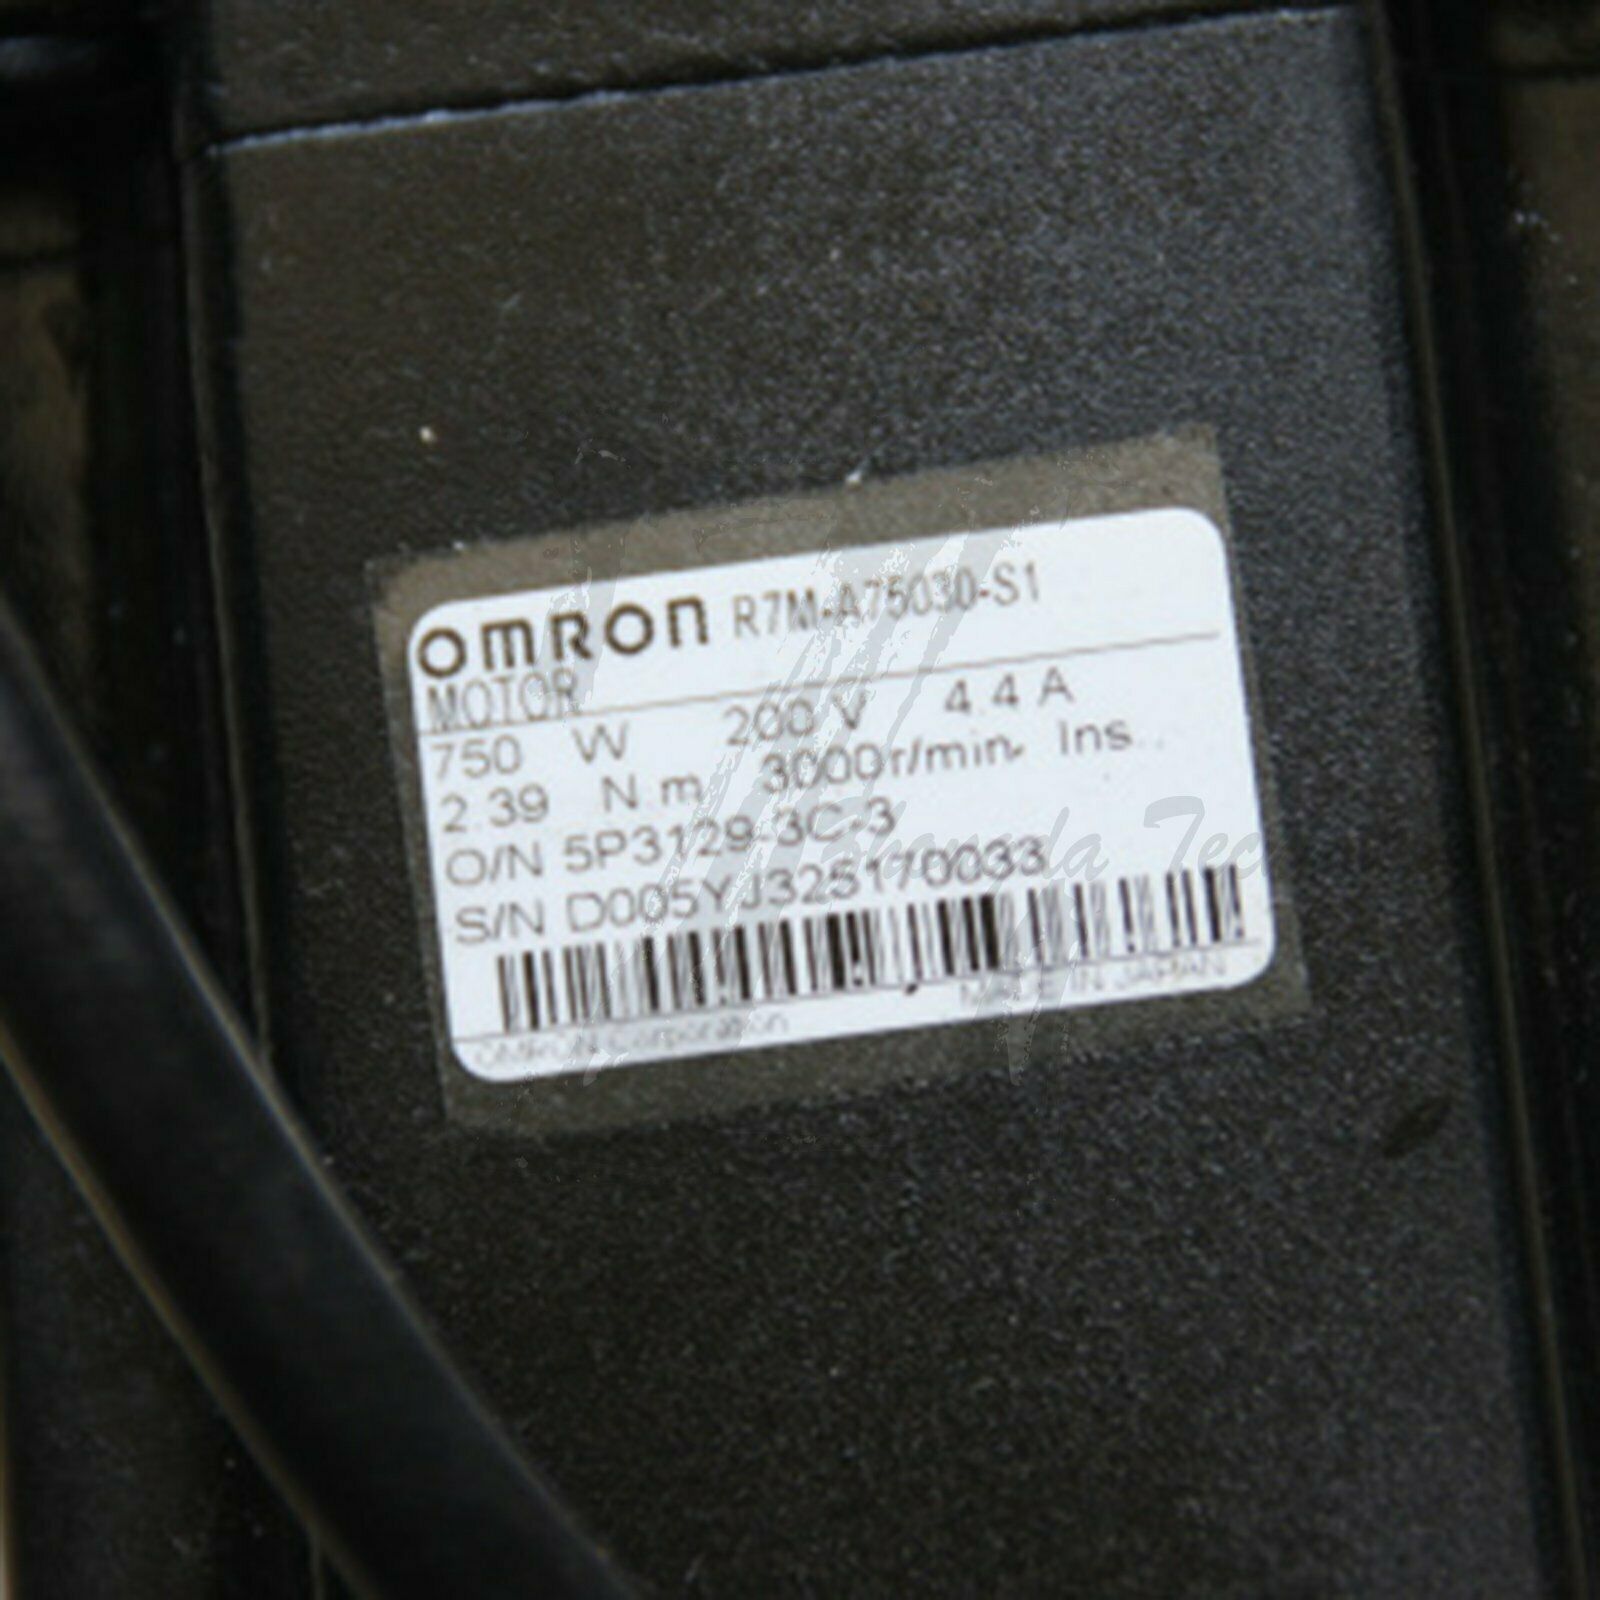 1Pc new Omron R7M-A75030-S1 servo motor one year warranty KOEED 500+, 80%, import_2020_10_10_031751, Omron, Other